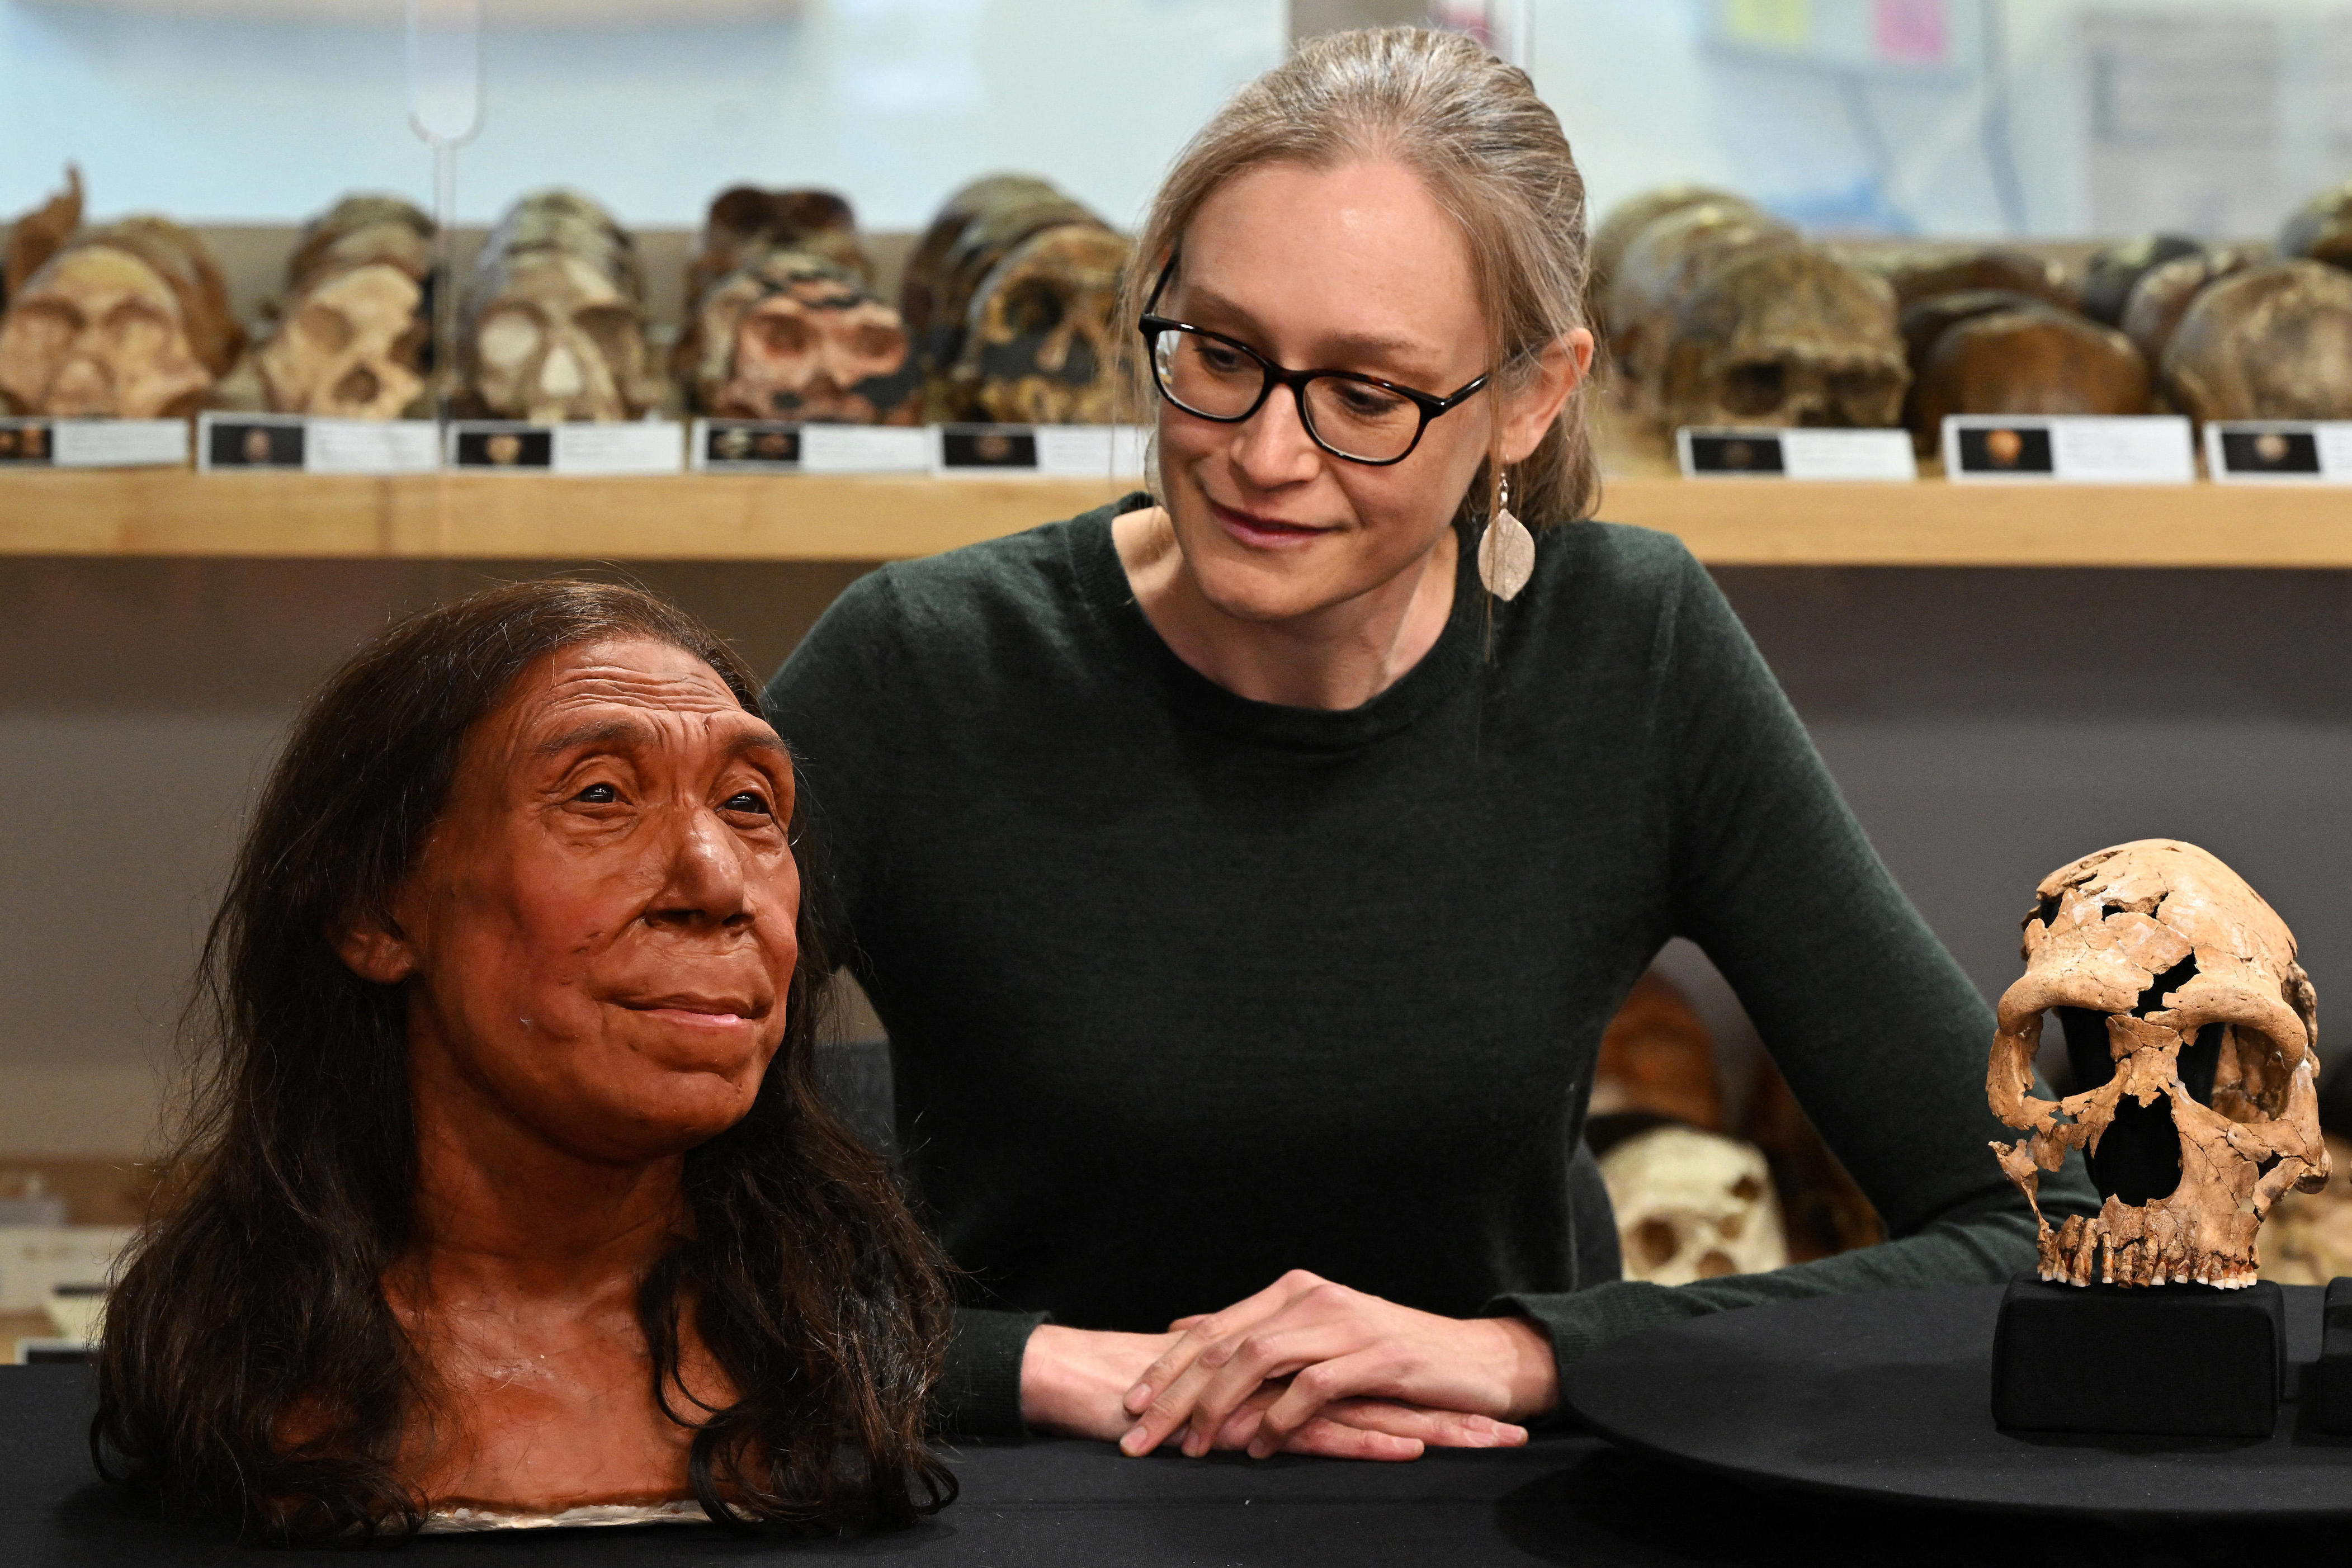 face of neanderthal woman revealed 75,000 years after she died